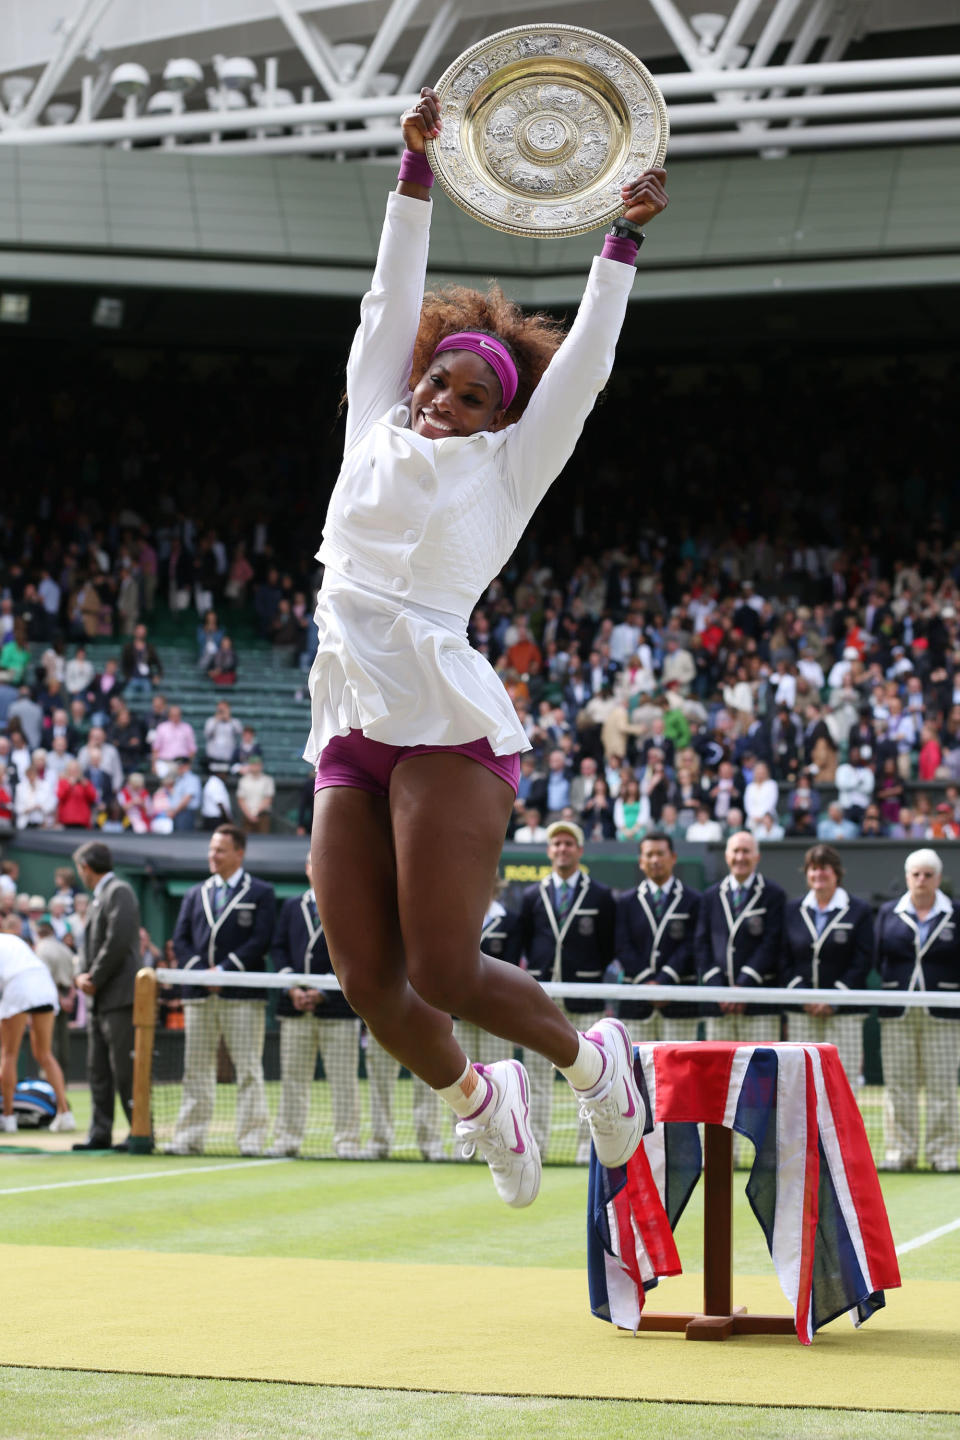 Serena Williams of the USA jumps in the air with the winners trophy and celebrates after her Ladies Singles final match against Agnieszka Radwanska of Poland on day twelve of the Wimbledon Lawn Tennis Championships at the All England Lawn Tennis and Croquet Club on July 7, 2012 in London, England. (Photo by Julian Finney/Getty Images)